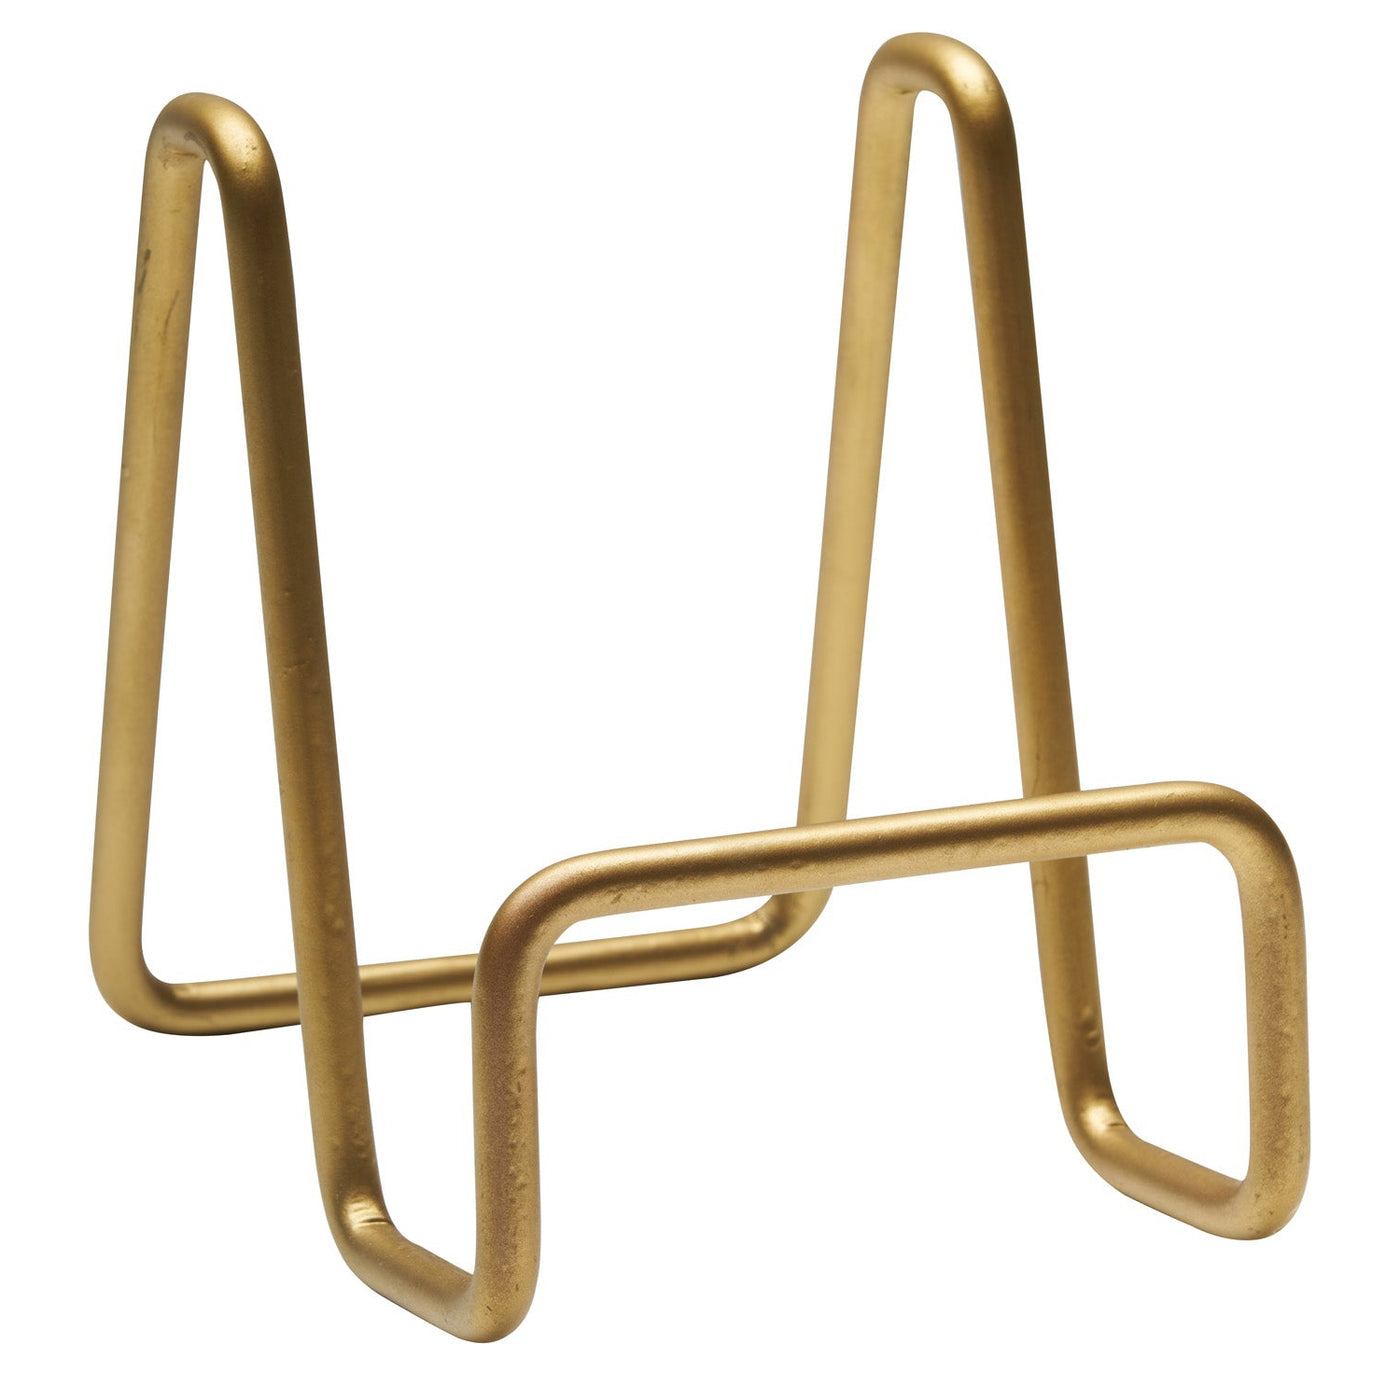 Matte Gold Finish Board Stand-Home/Giftware-Kevin's Fine Outdoor Gear & Apparel